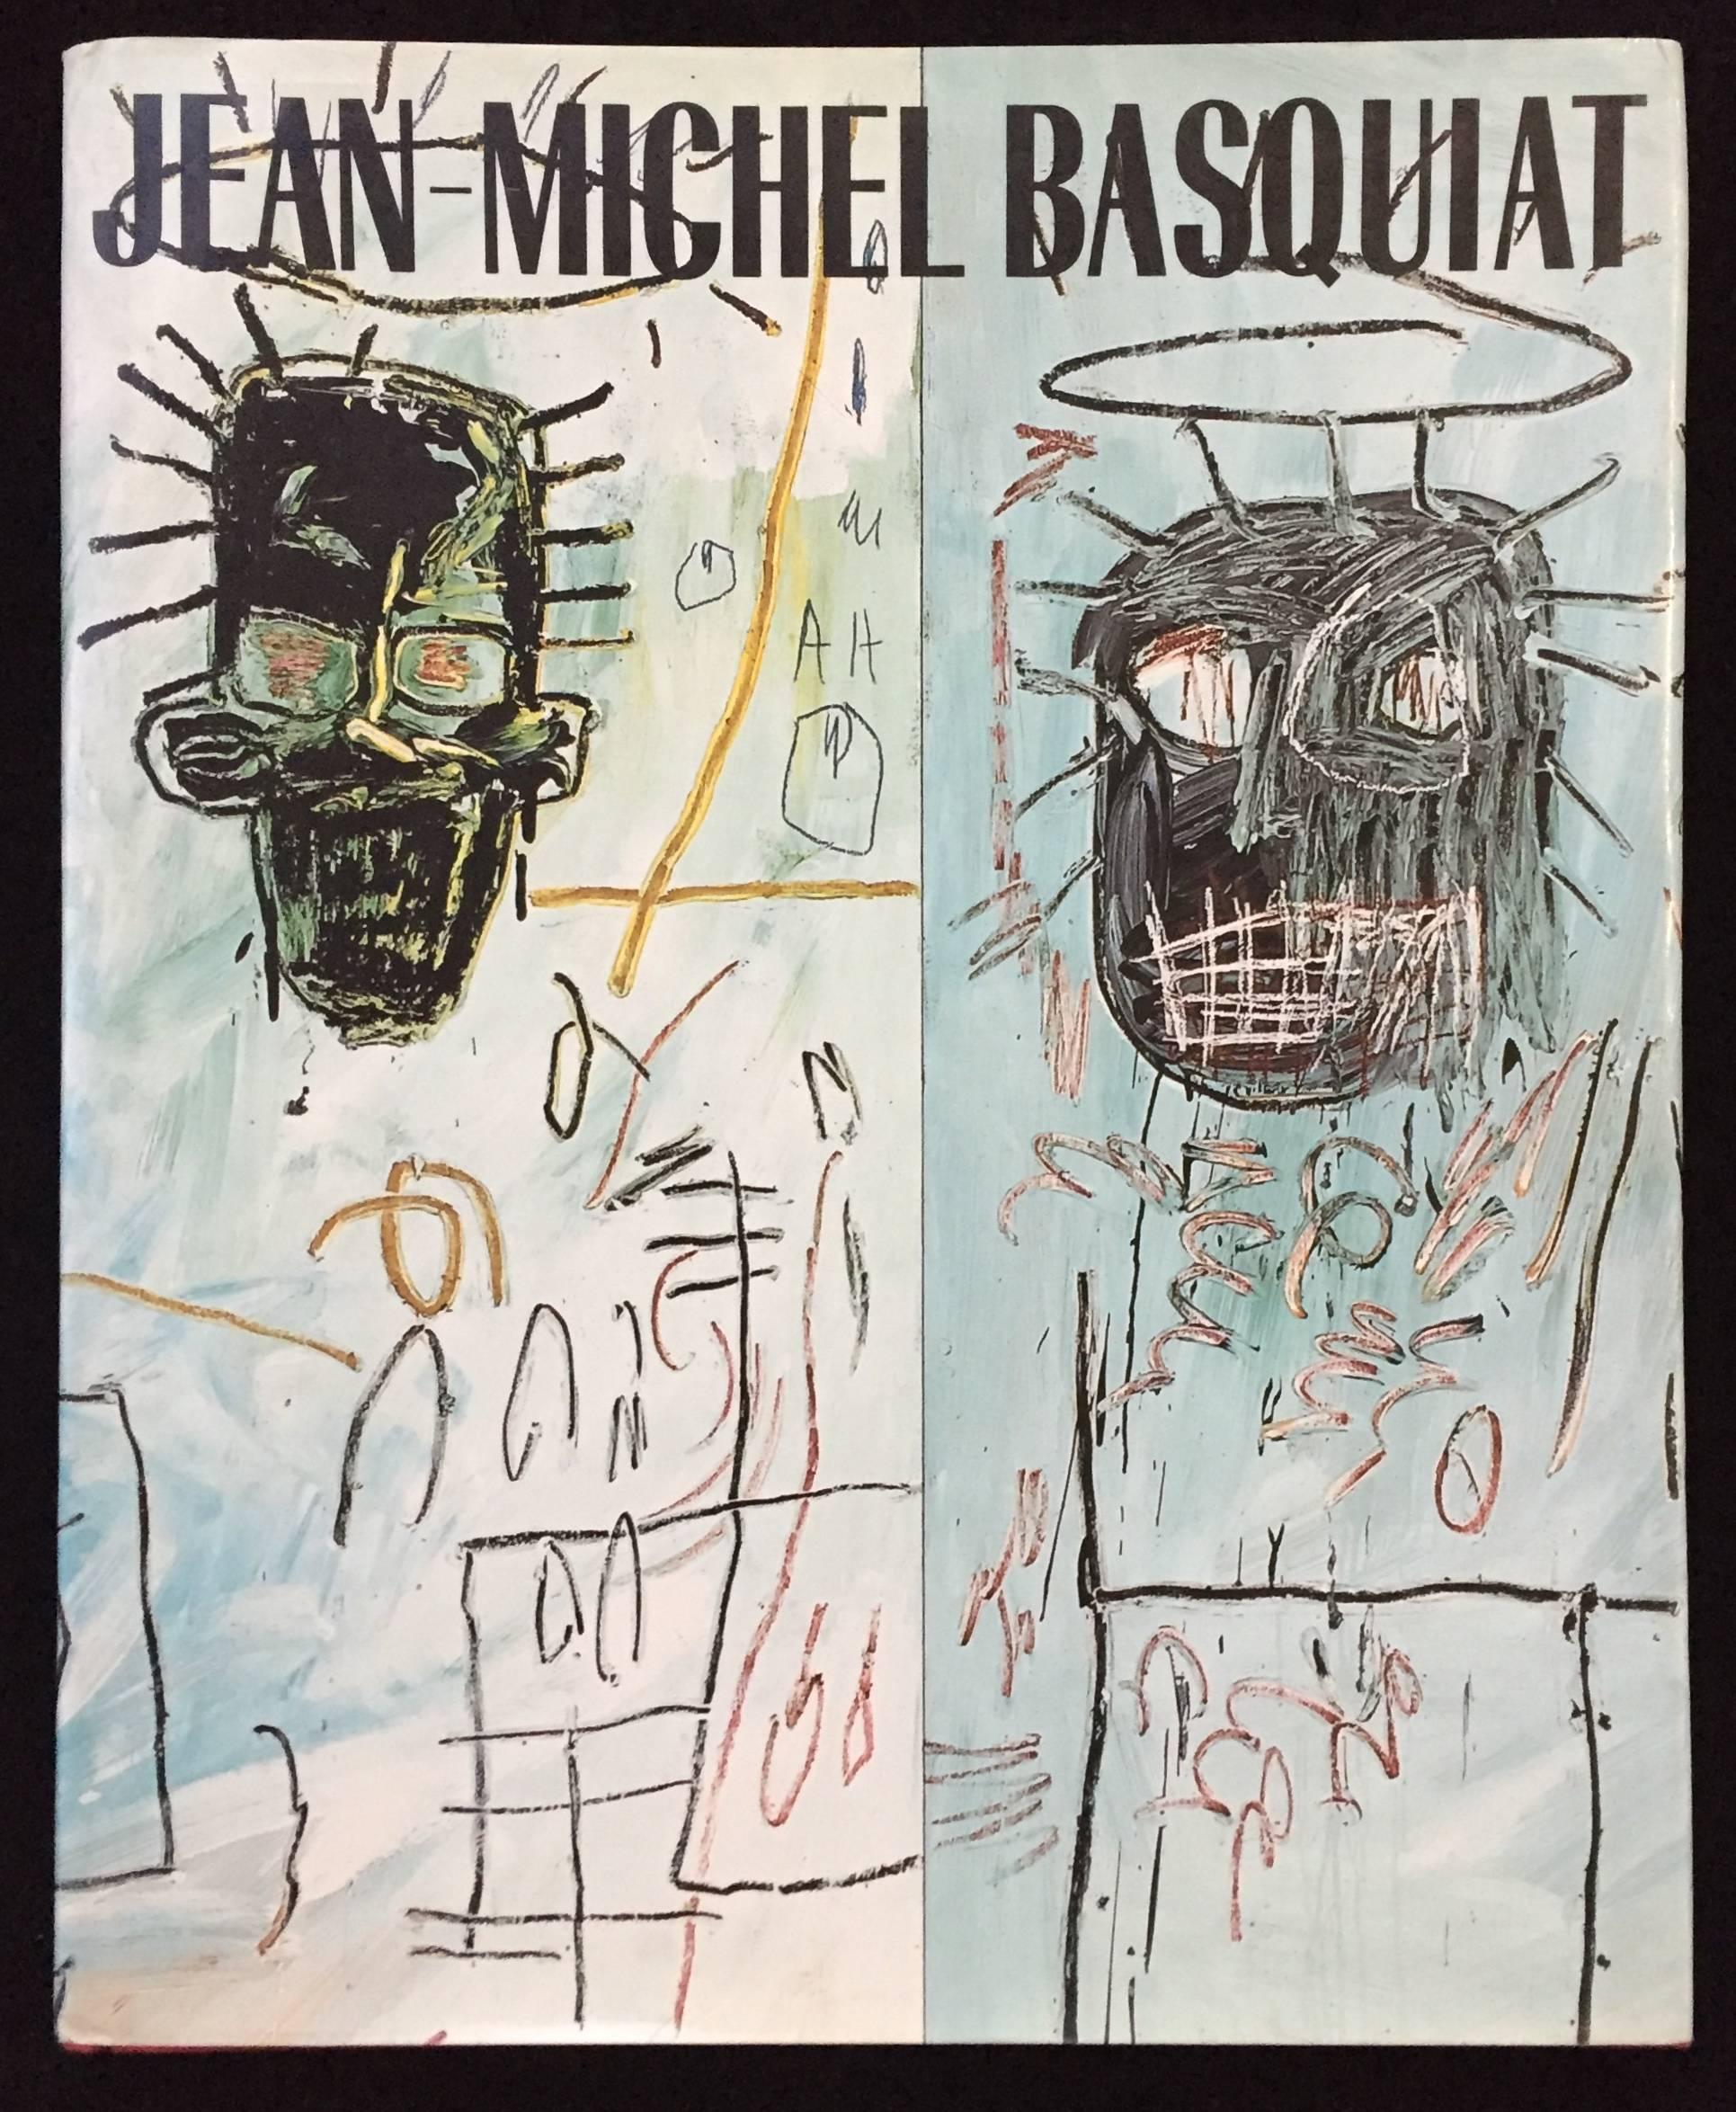 Basquiat at Vrej Baghoomian (exhibition catalog)  - Print by after Jean-Michel Basquiat